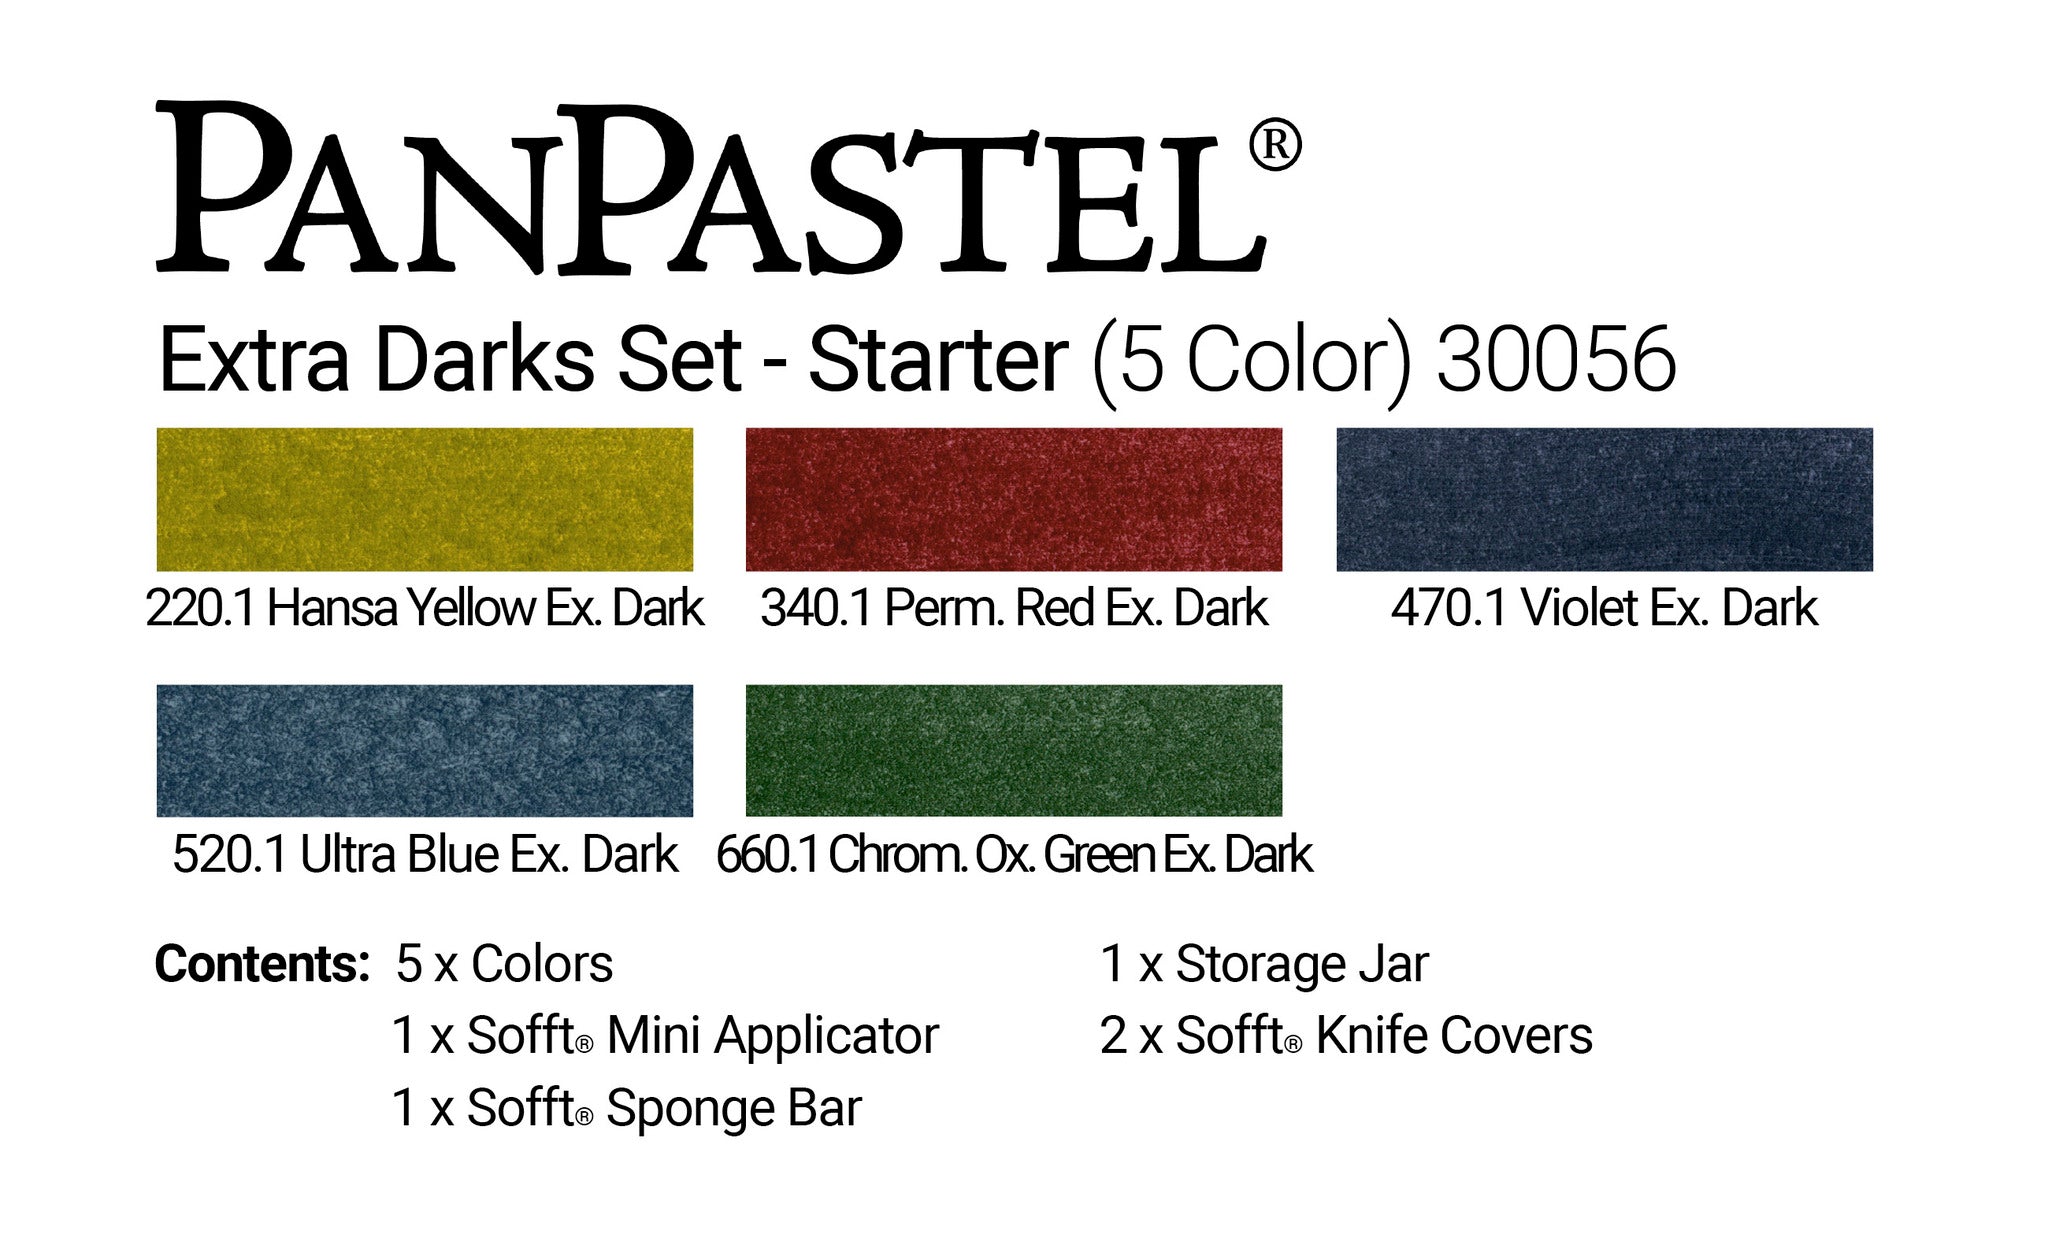 PanPastel Starter Set Extra Dark Shades 30056. This set lends itself well to backgrounds and shades. Includes a selections of Sofft tools application and blending tools